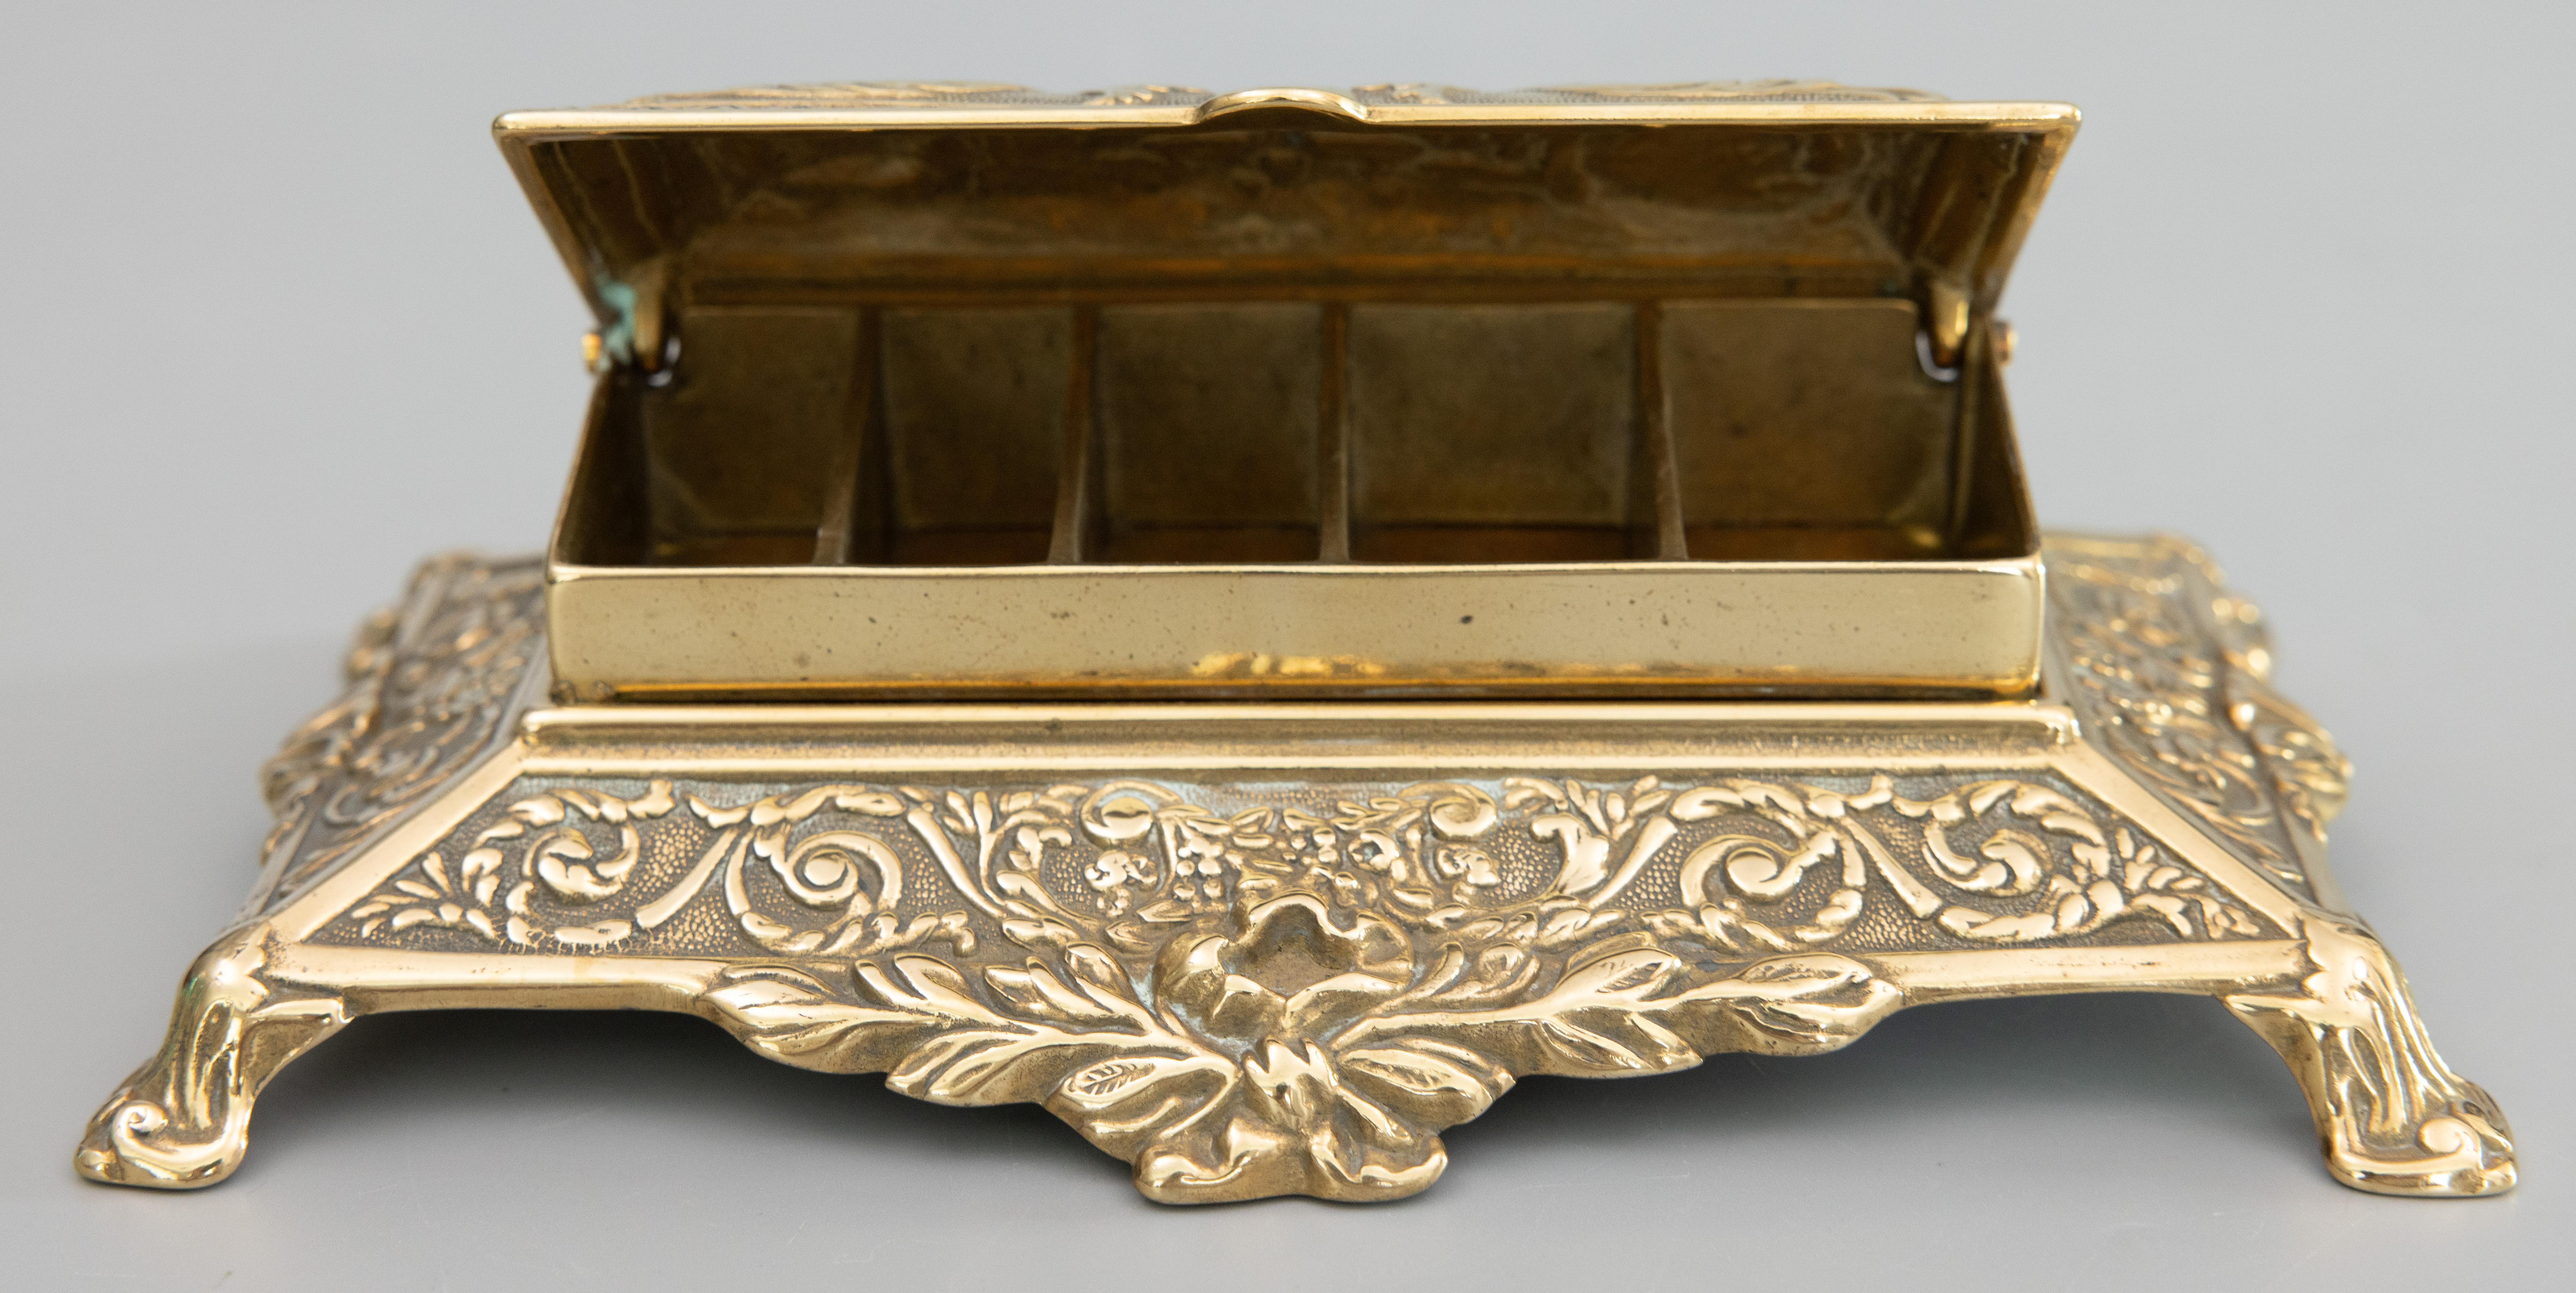 A superb antique English Art Nouveau cast brass desktop footed stamp box with a lovely brass patina, circa 1920. This fine box has an ornate Neoclassical design and scrolled feet with a hinged lid and five sloped compartments for stamps. It's a nice